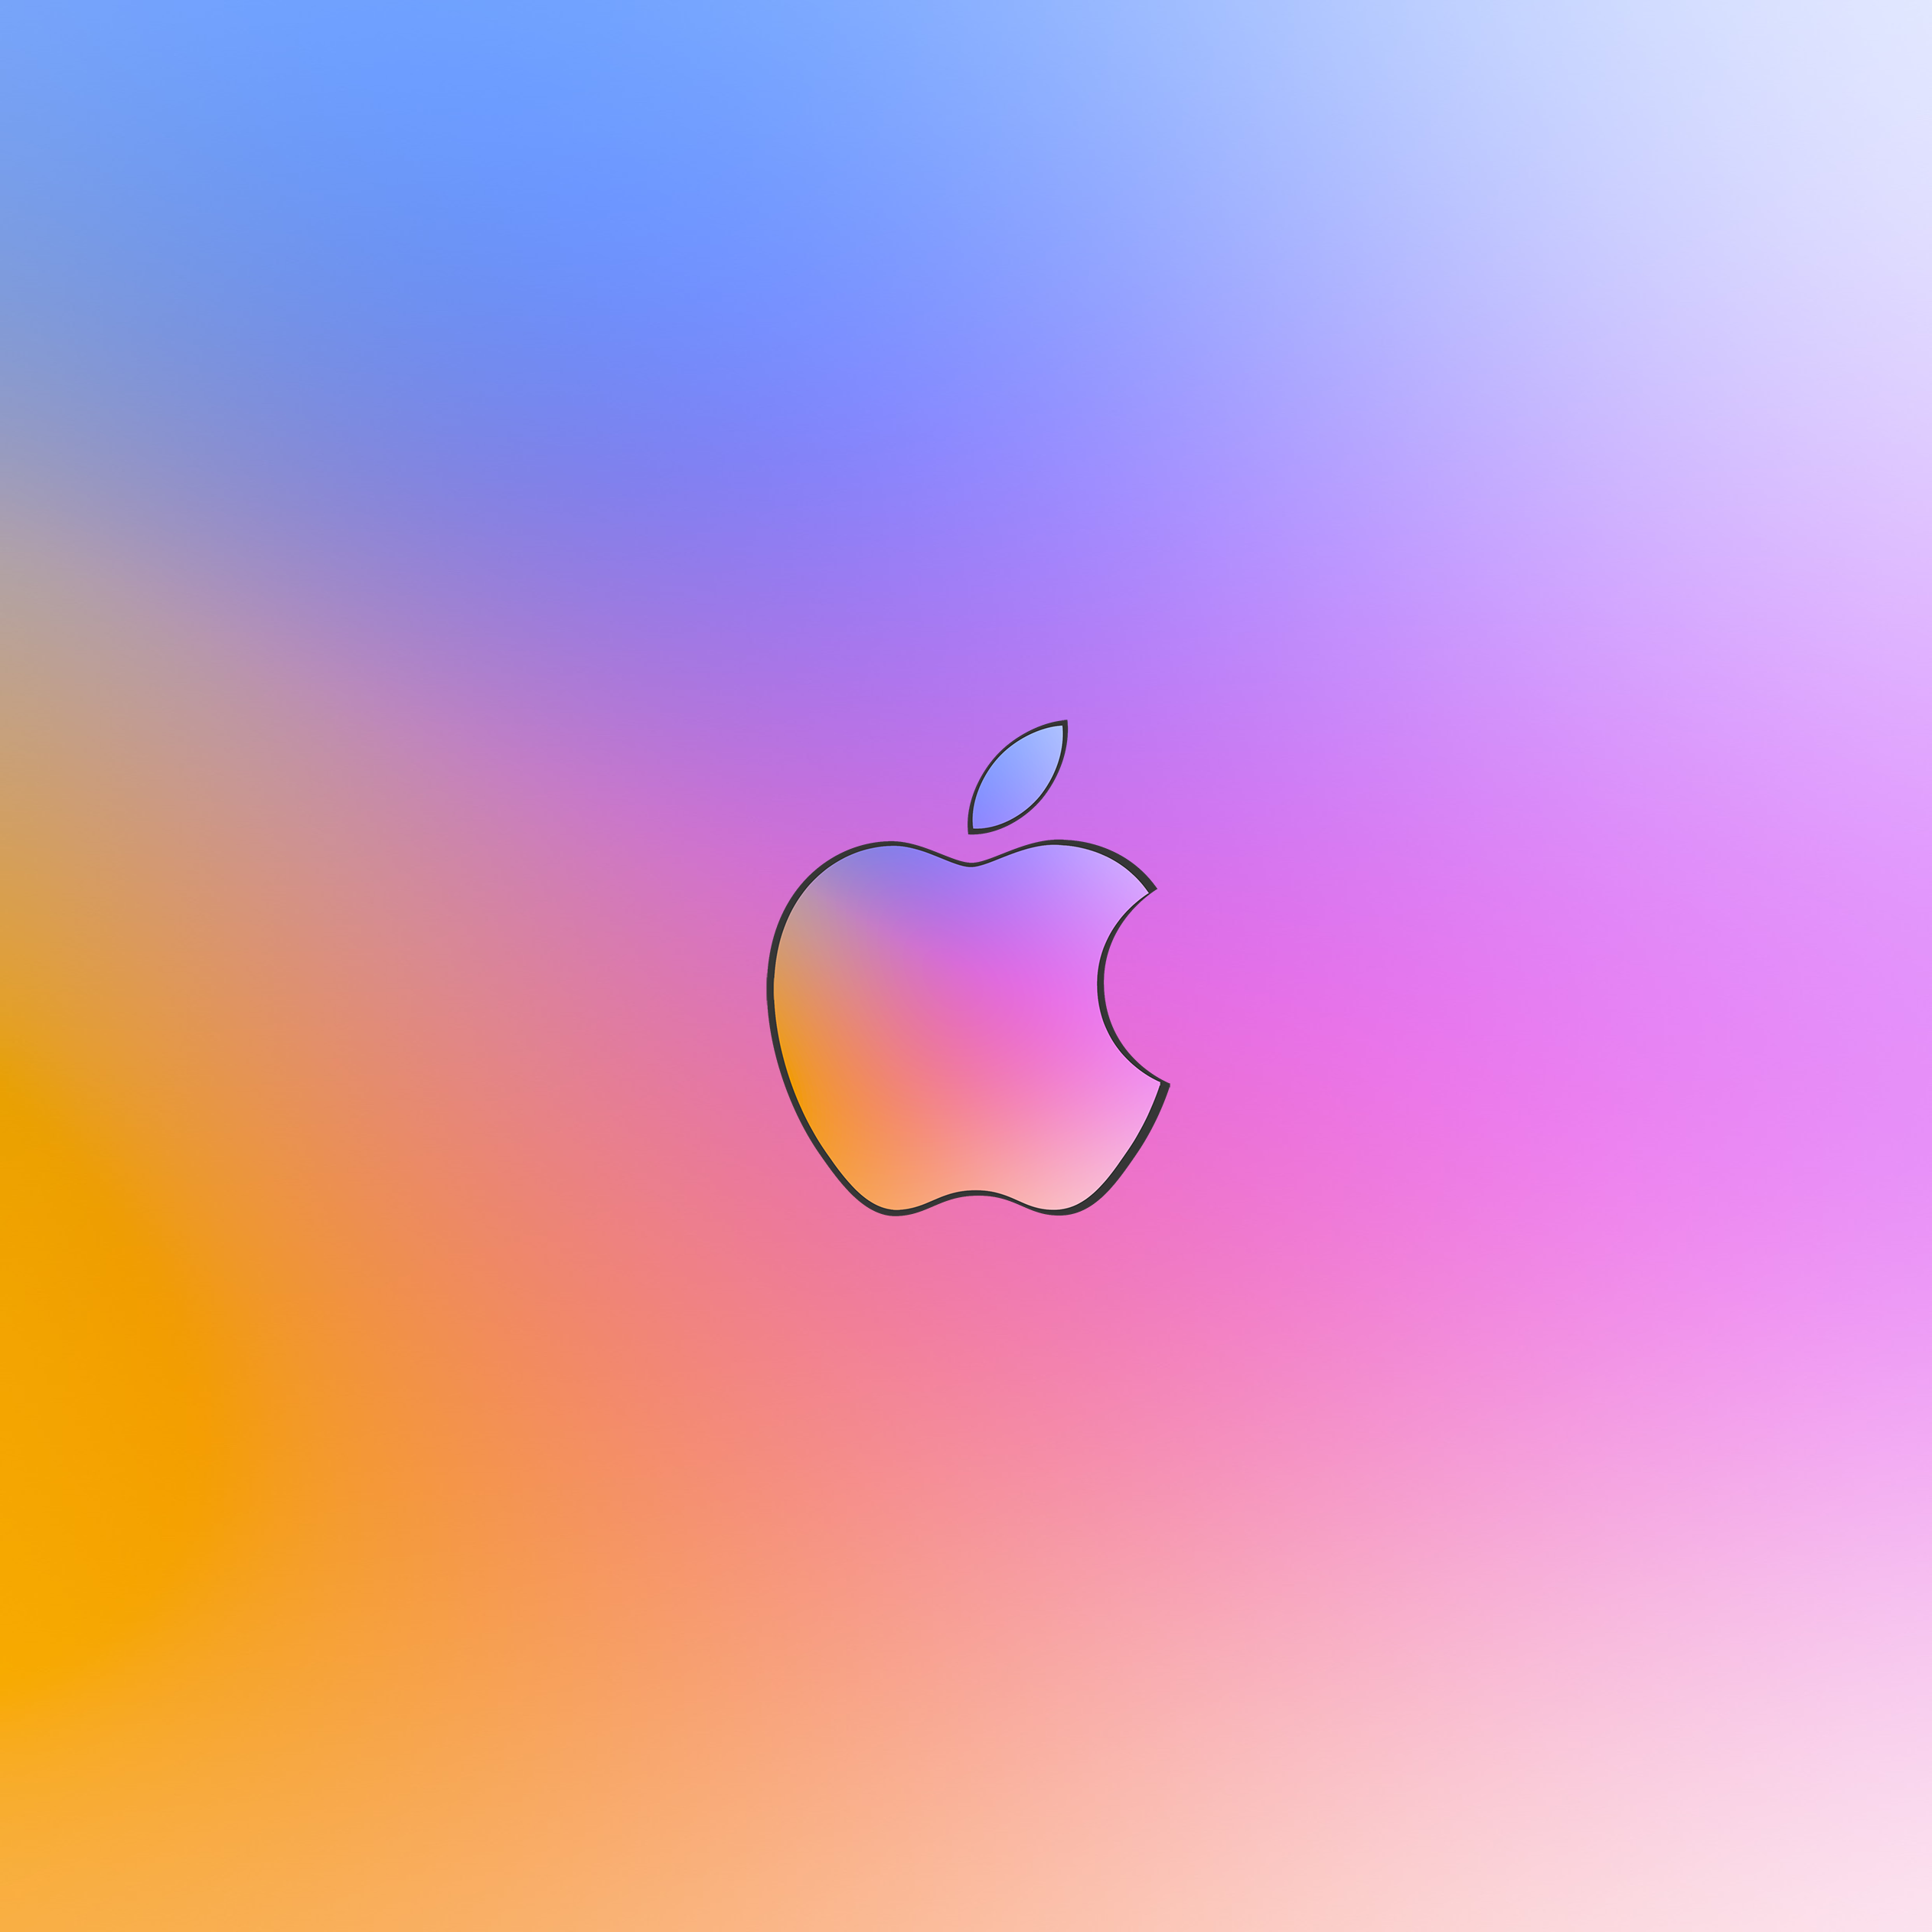 Apple Card Wallpaper For Iphone, Ipad, And Desktop - Apple Wallpaper Ipad , HD Wallpaper & Backgrounds